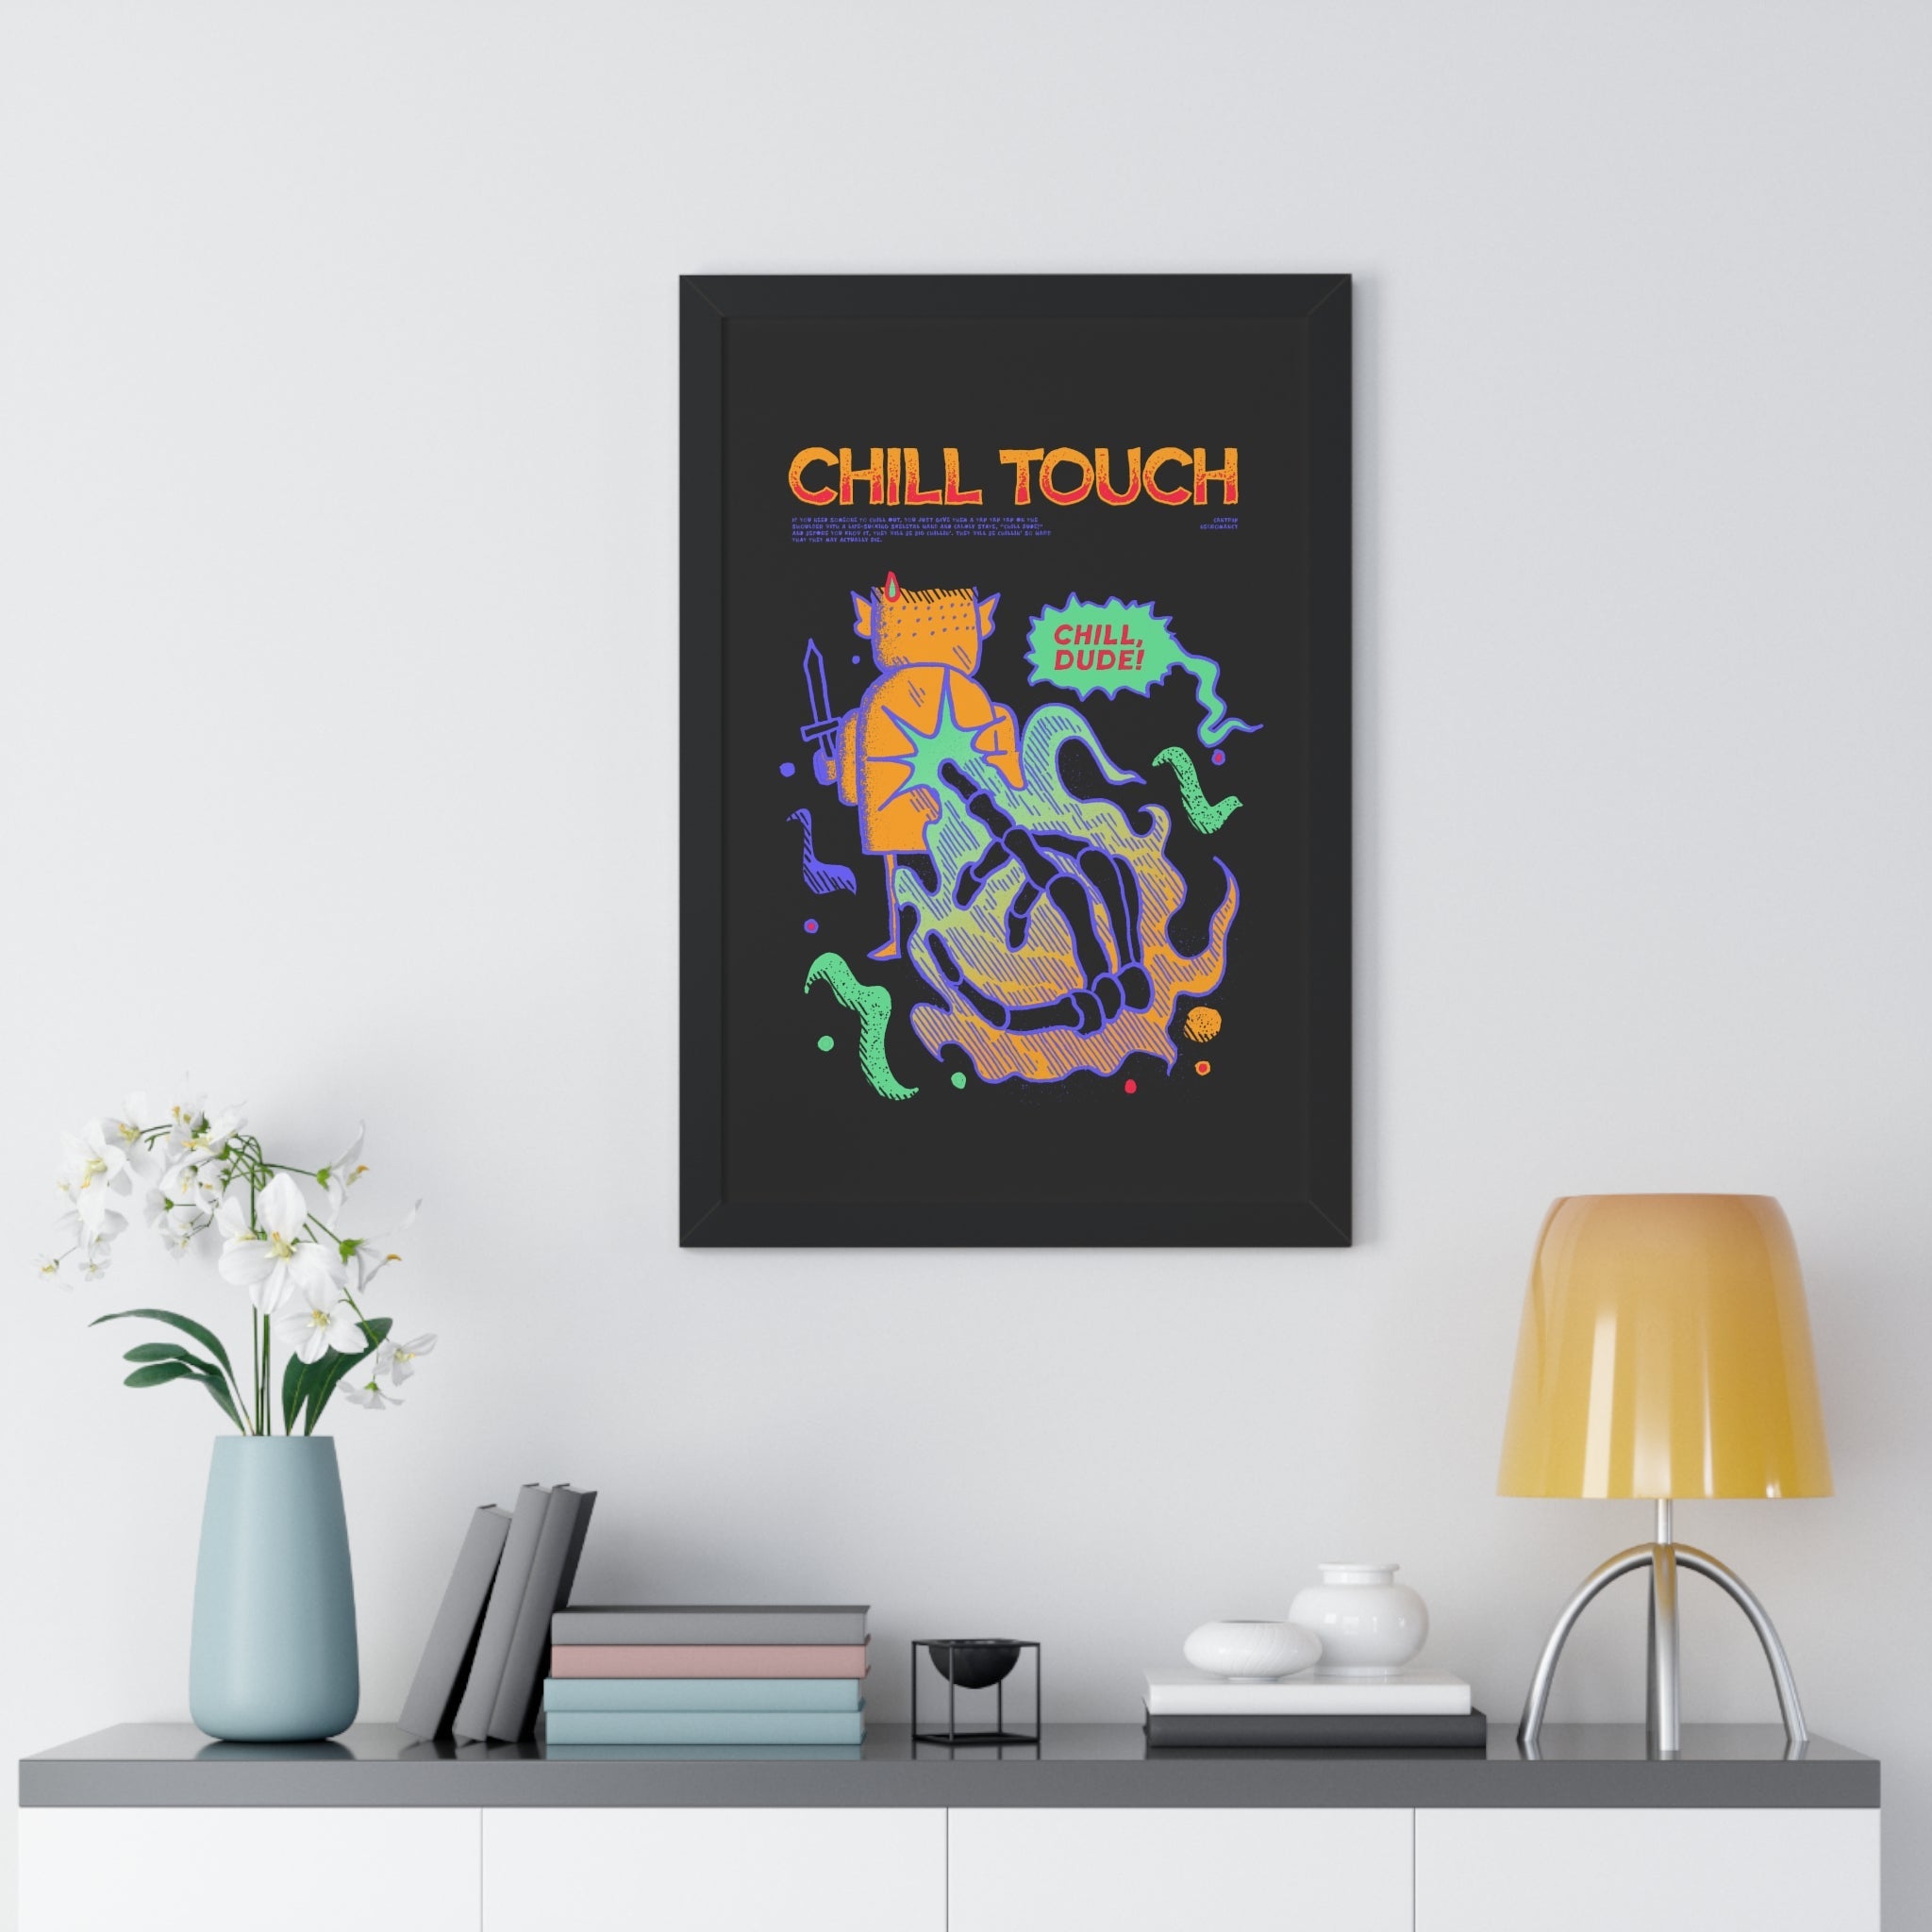 Chill Touch | Framed Poster - Framed Poster - Ace of Gnomes - 31396795721206930064